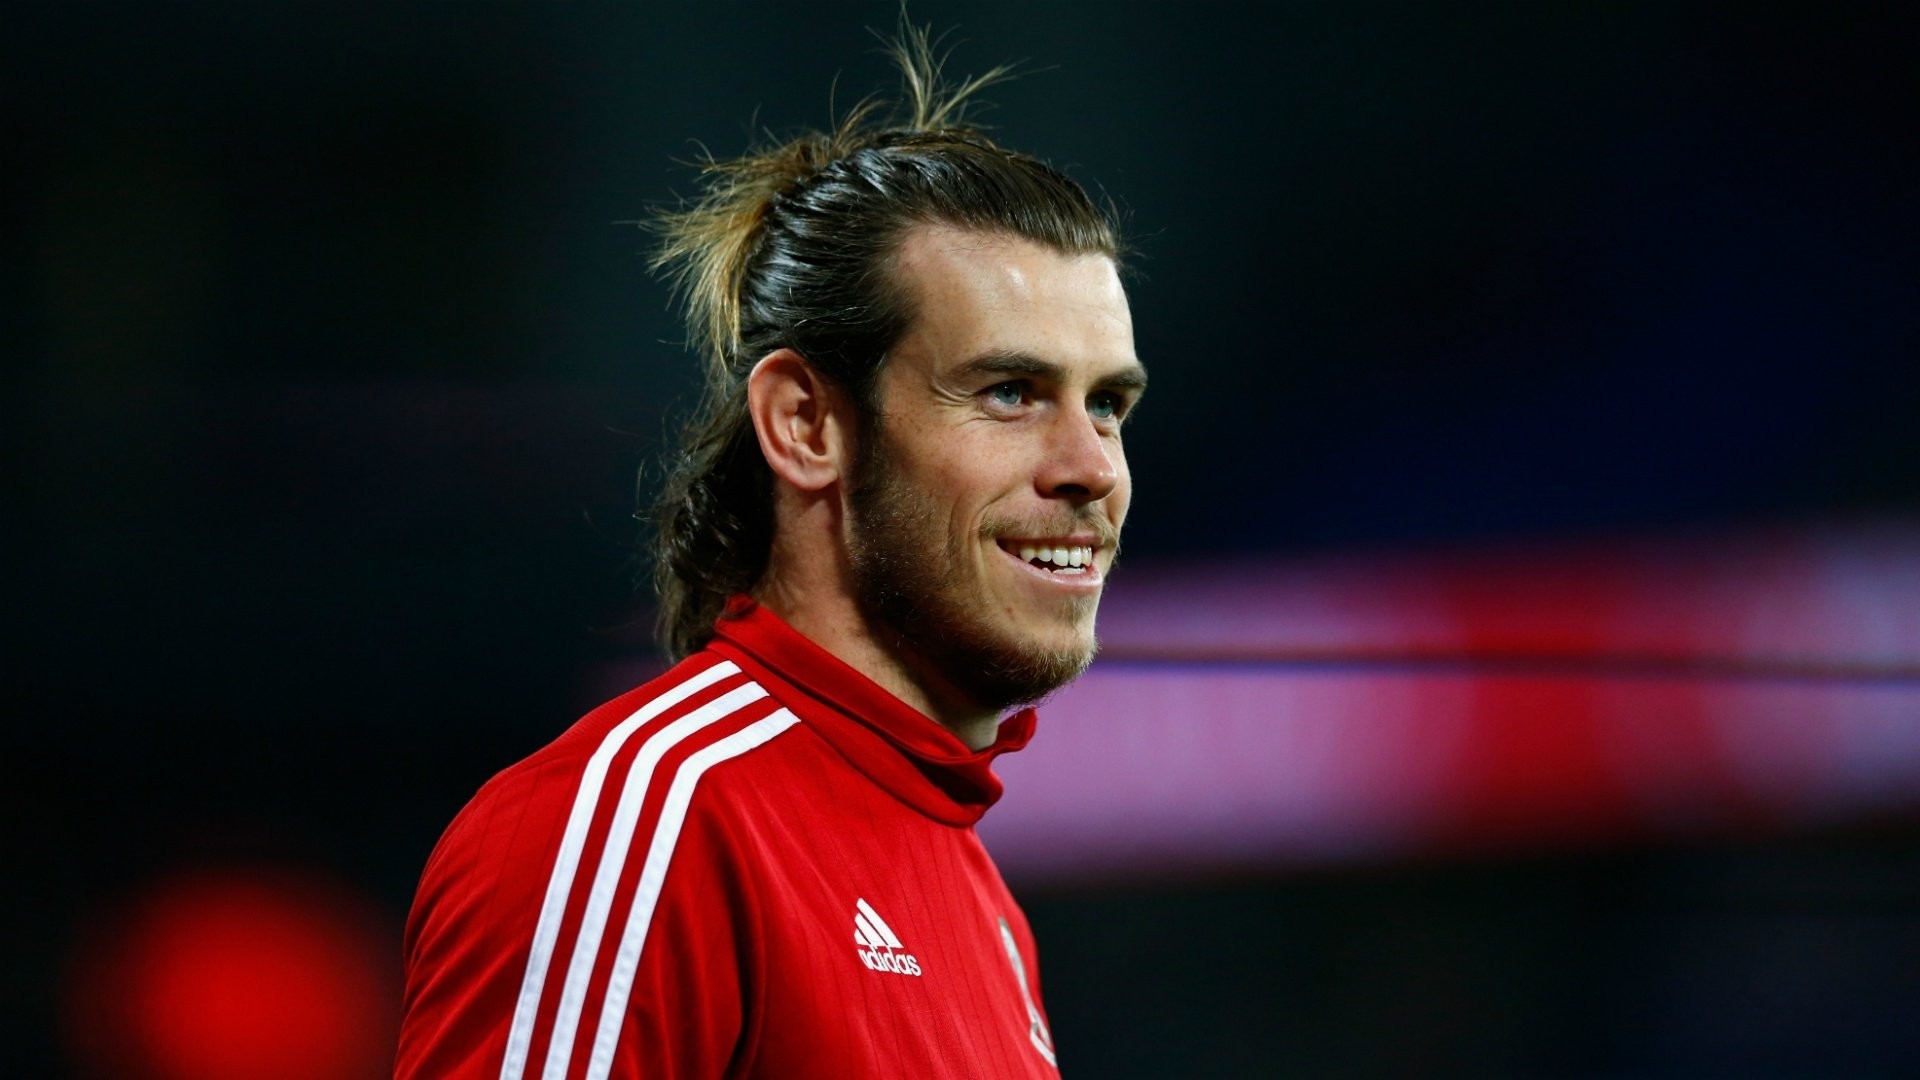 1920x1080 ... Gareth Bale HD wallpapers and Images download free 